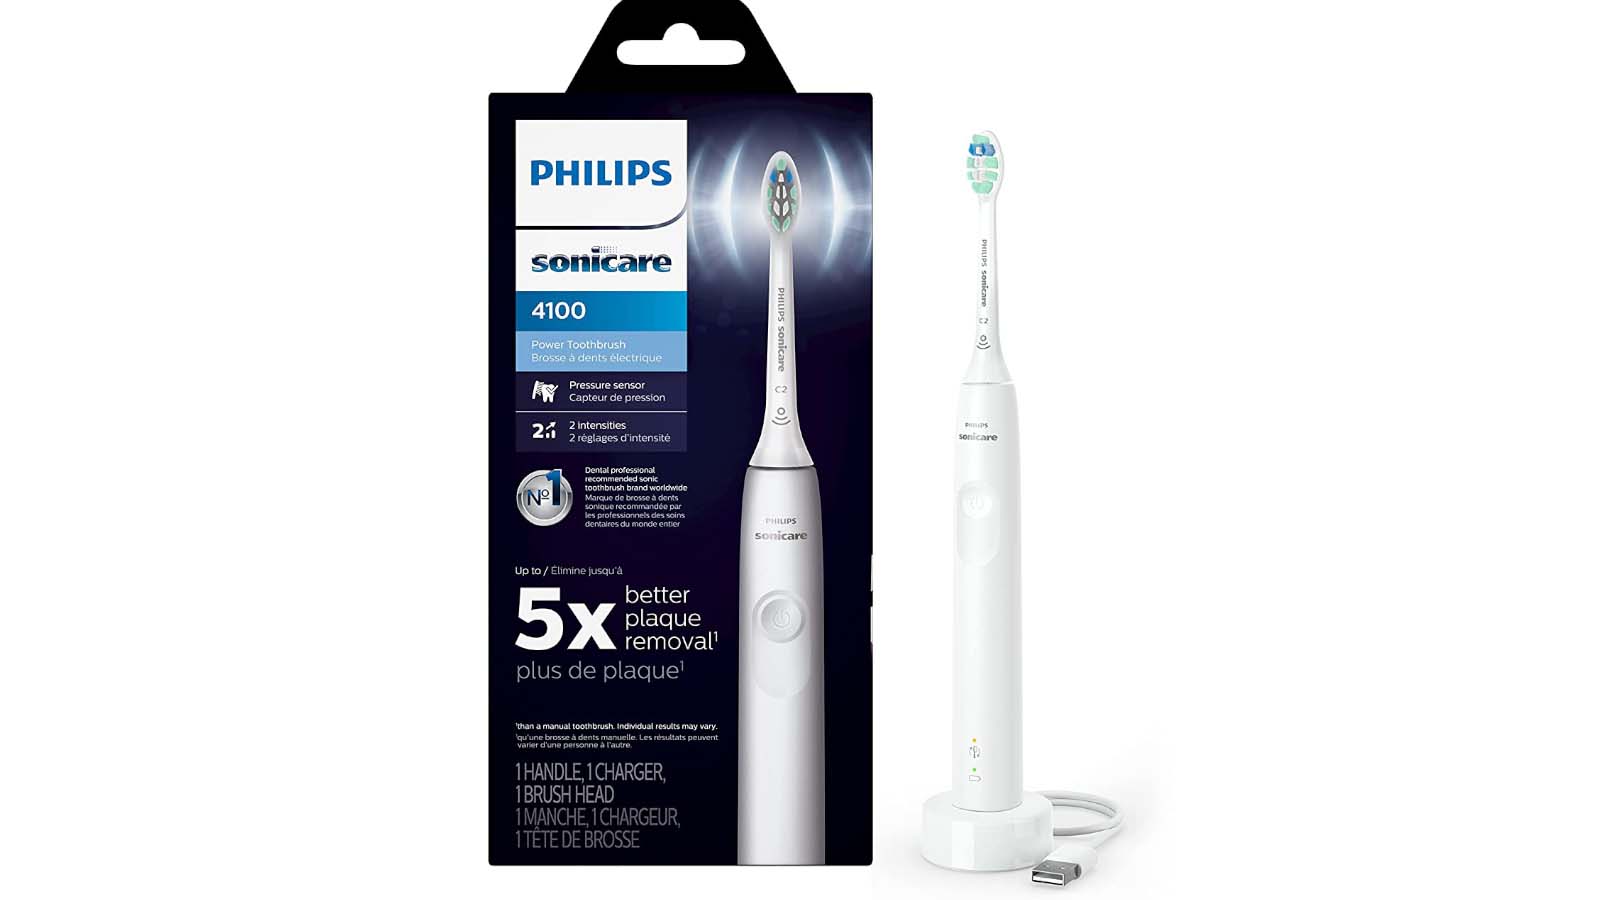 Philips Sonicare ProtectiveClean 4100 (White, HX3681/23) toothbrush and its packaging